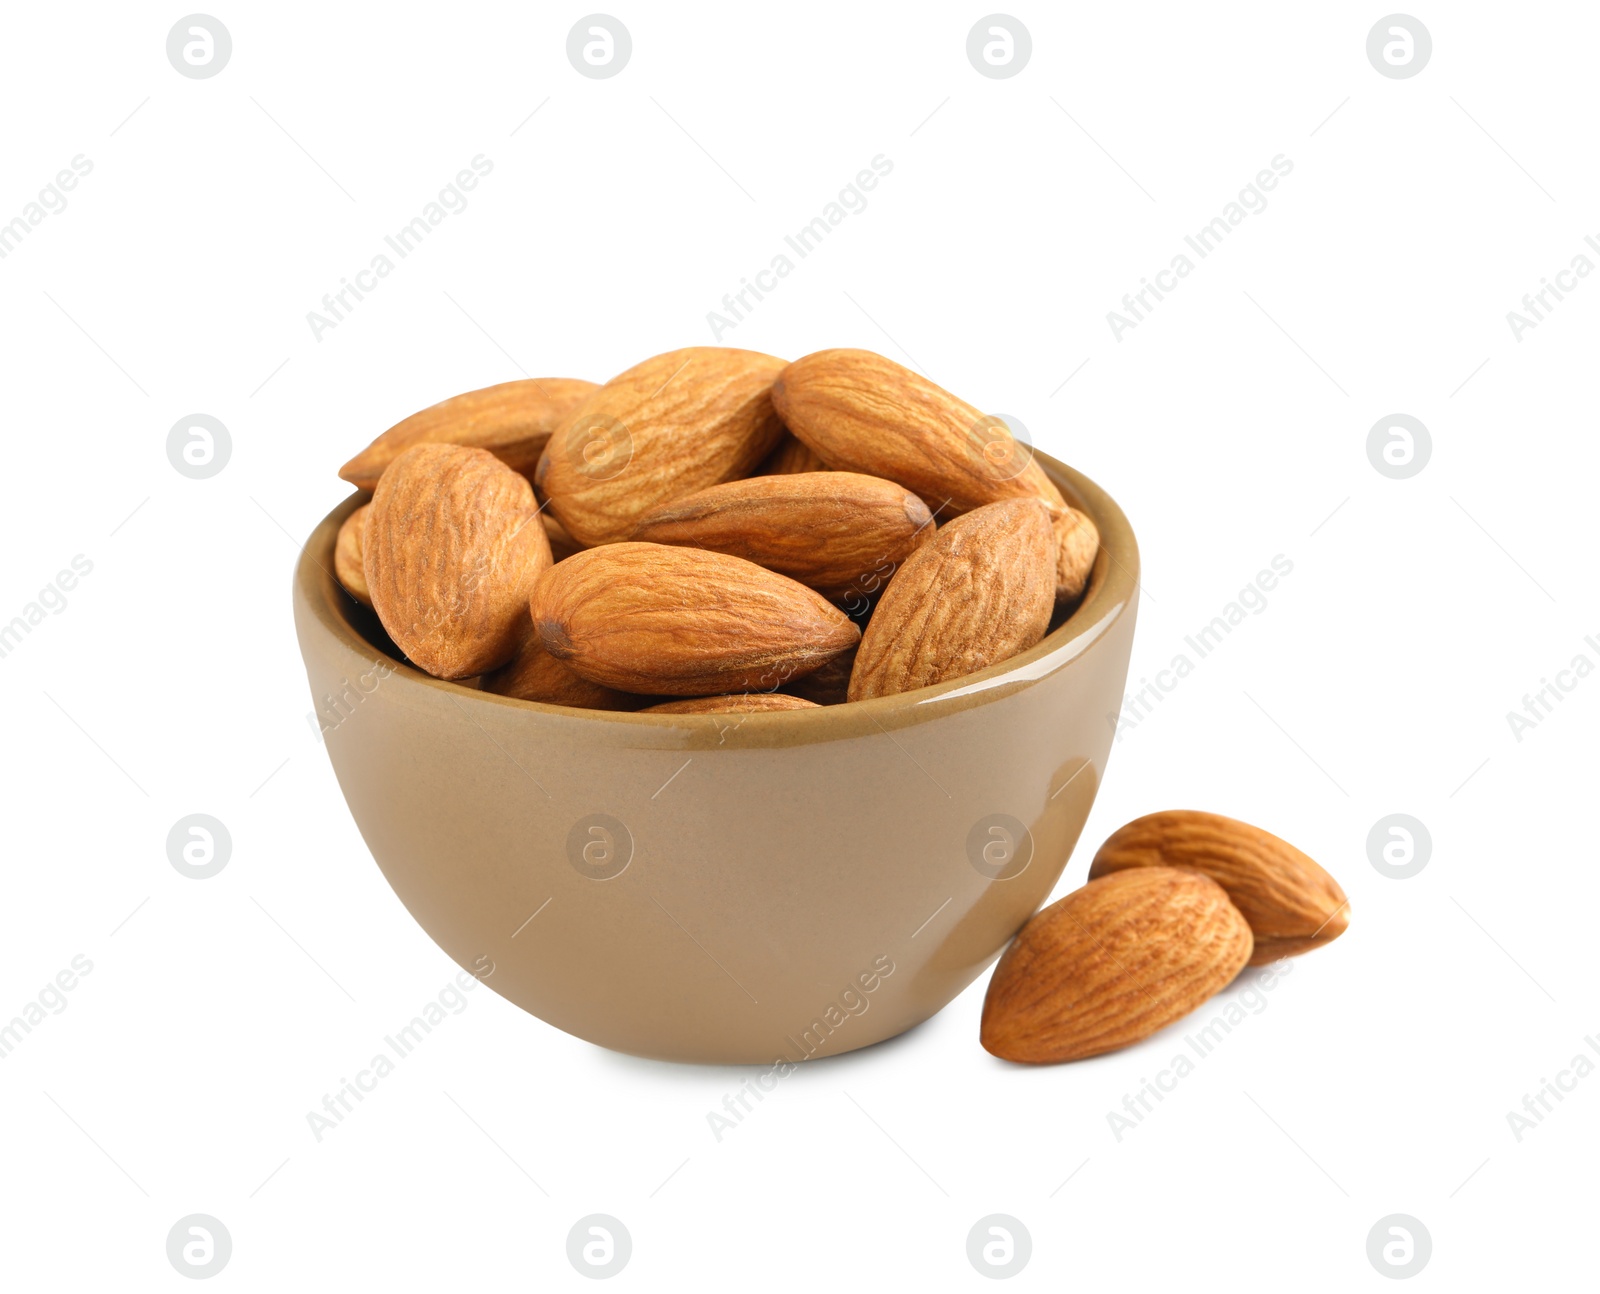 Photo of Bowl and organic almond nuts on white background. Healthy snack